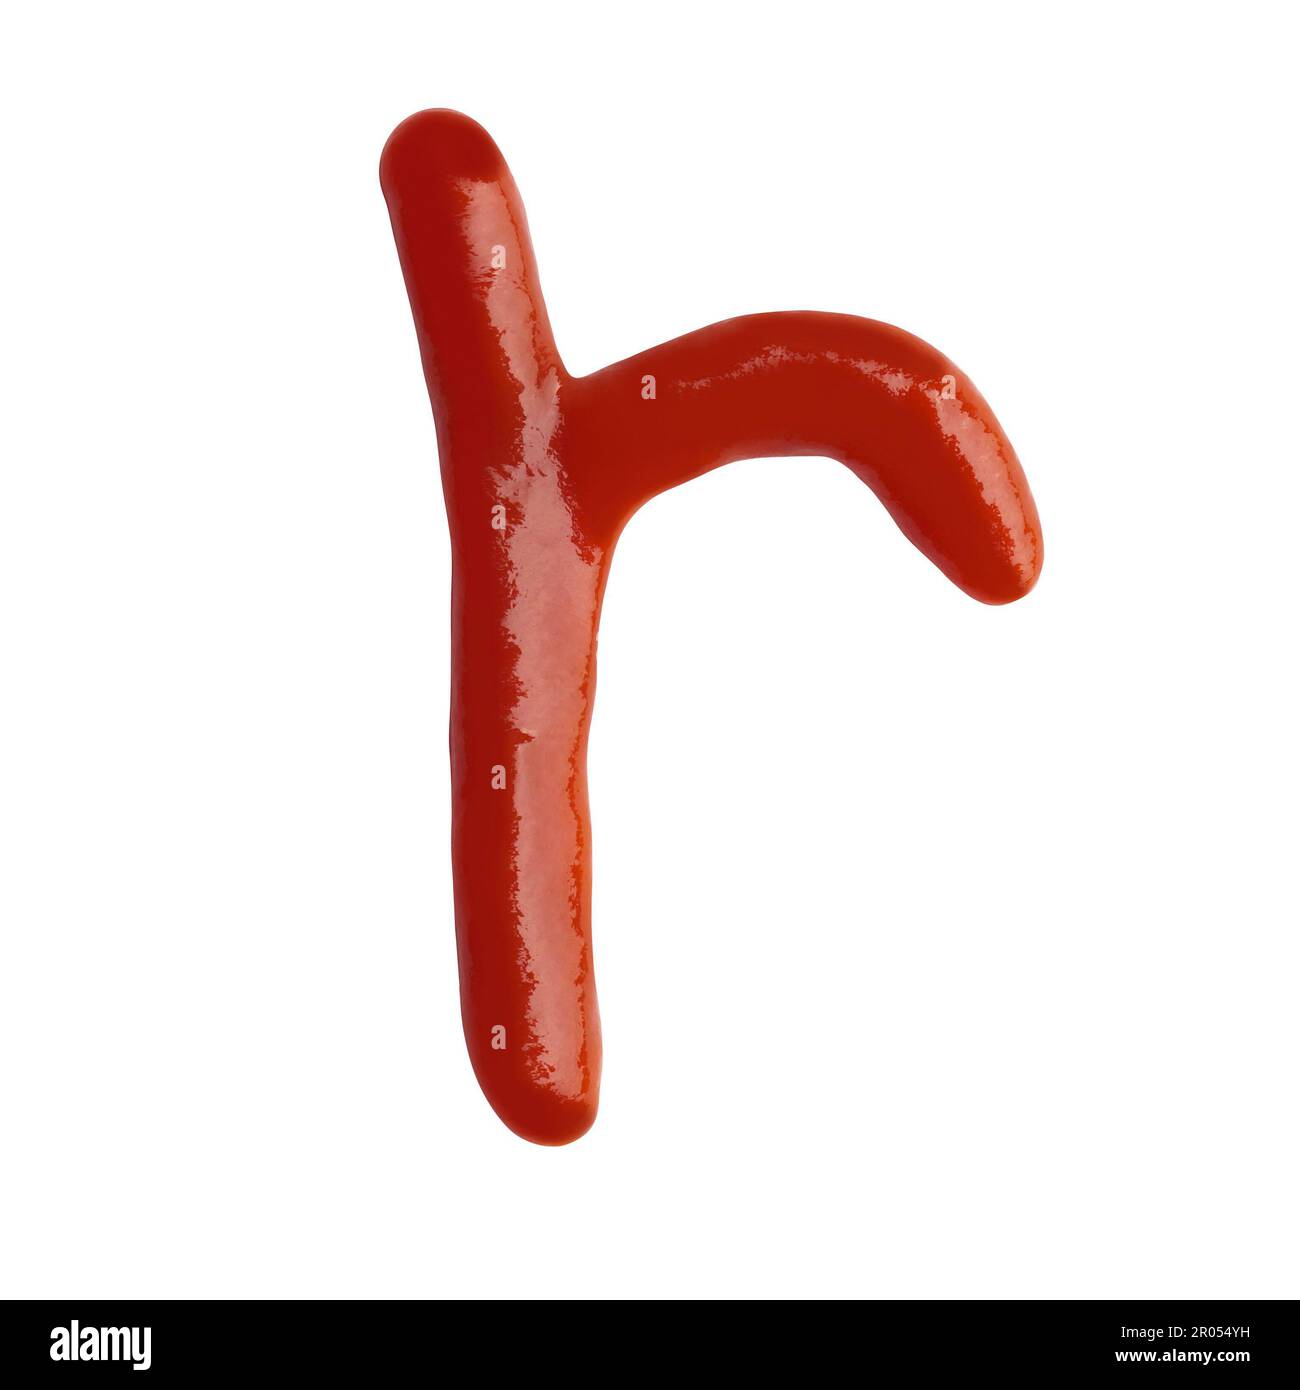 Letter R written with ketchup on white background Stock Photo